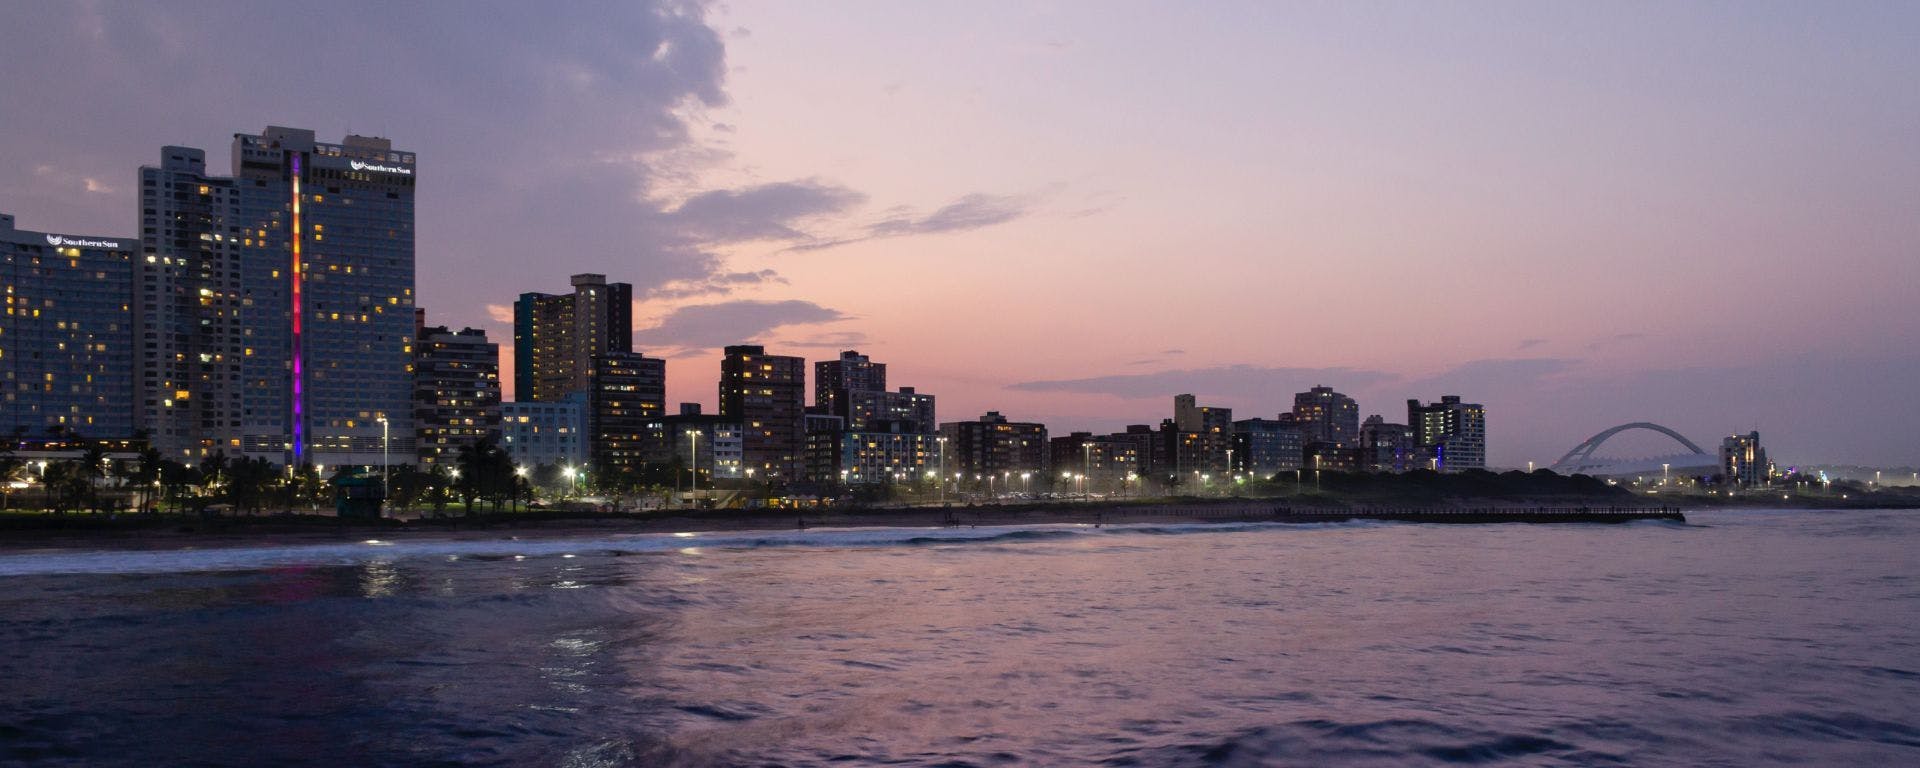 Coworking, Coliving and Surfing in North Beach - Durban (South Africa)